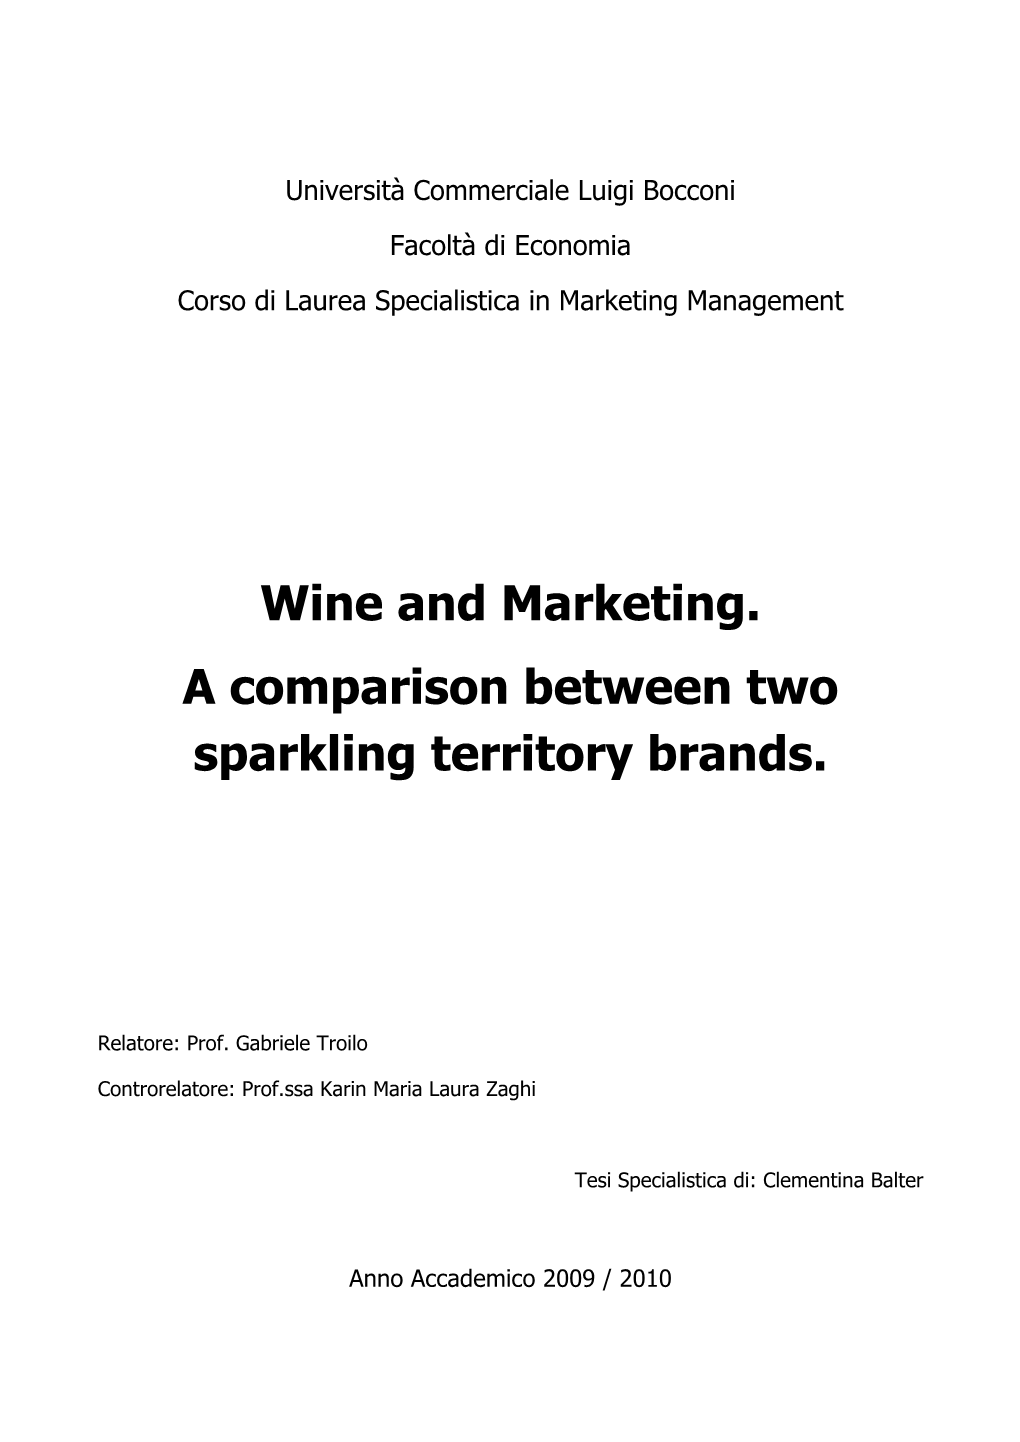 Wine and Marketing. a Comparison Between Two Sparkling Territory Brands